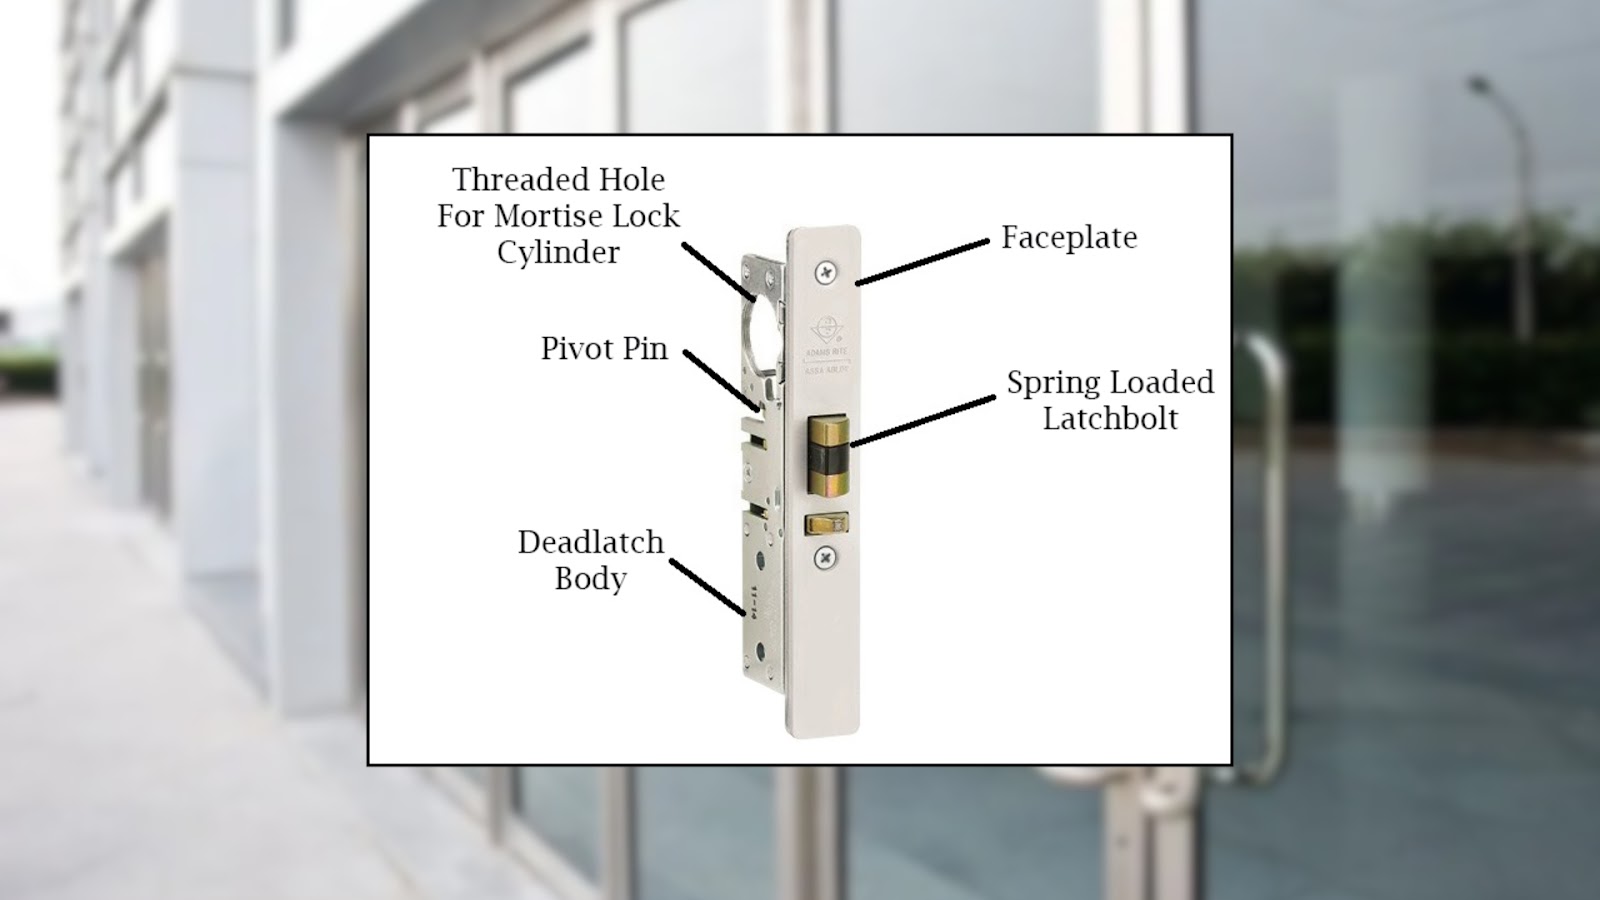 Illustration of a deadlatch mechanism with parts labeled. Visible components include the faceplate, a spring-loaded latchbolt, the deadlatch body, a pivot pin, and a threaded hole for a mortise lock cylinder.